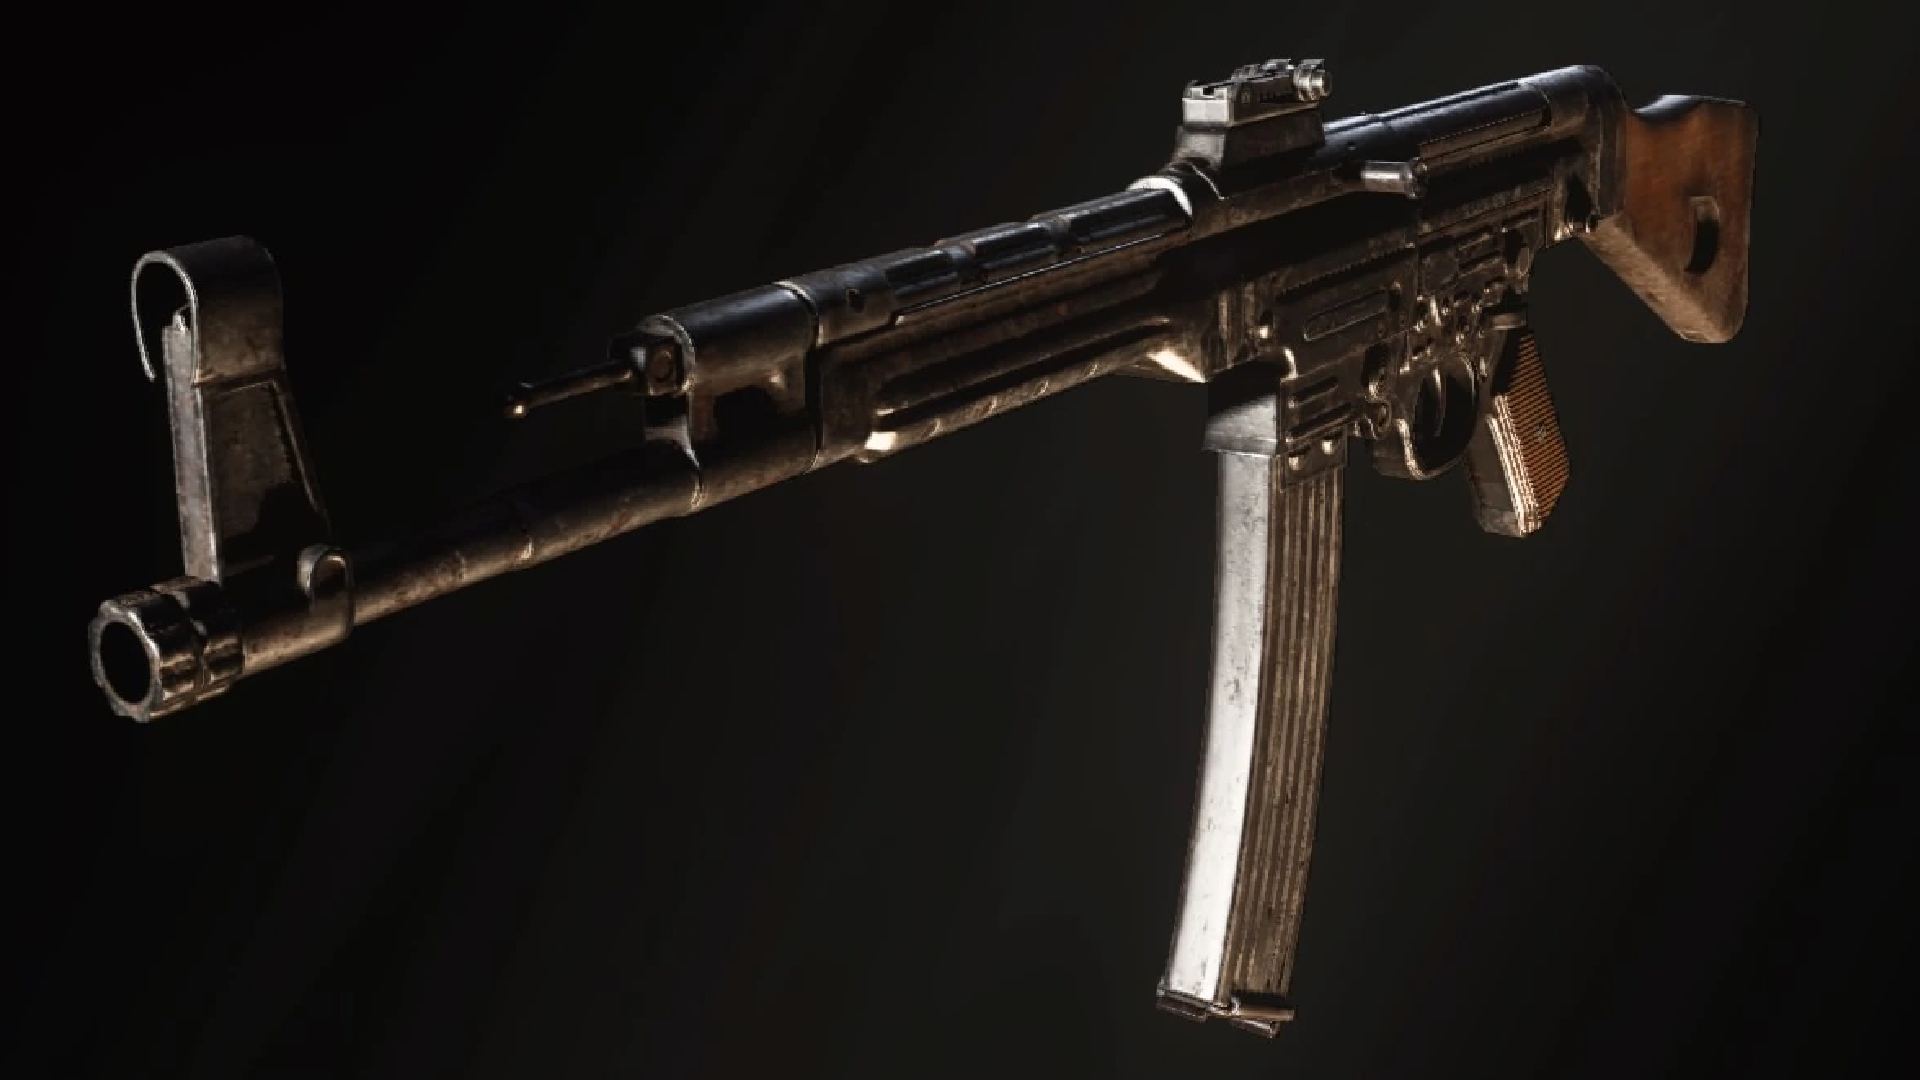 CoD Vanguard launch weapons: The STG as pictured in a previous COD game.